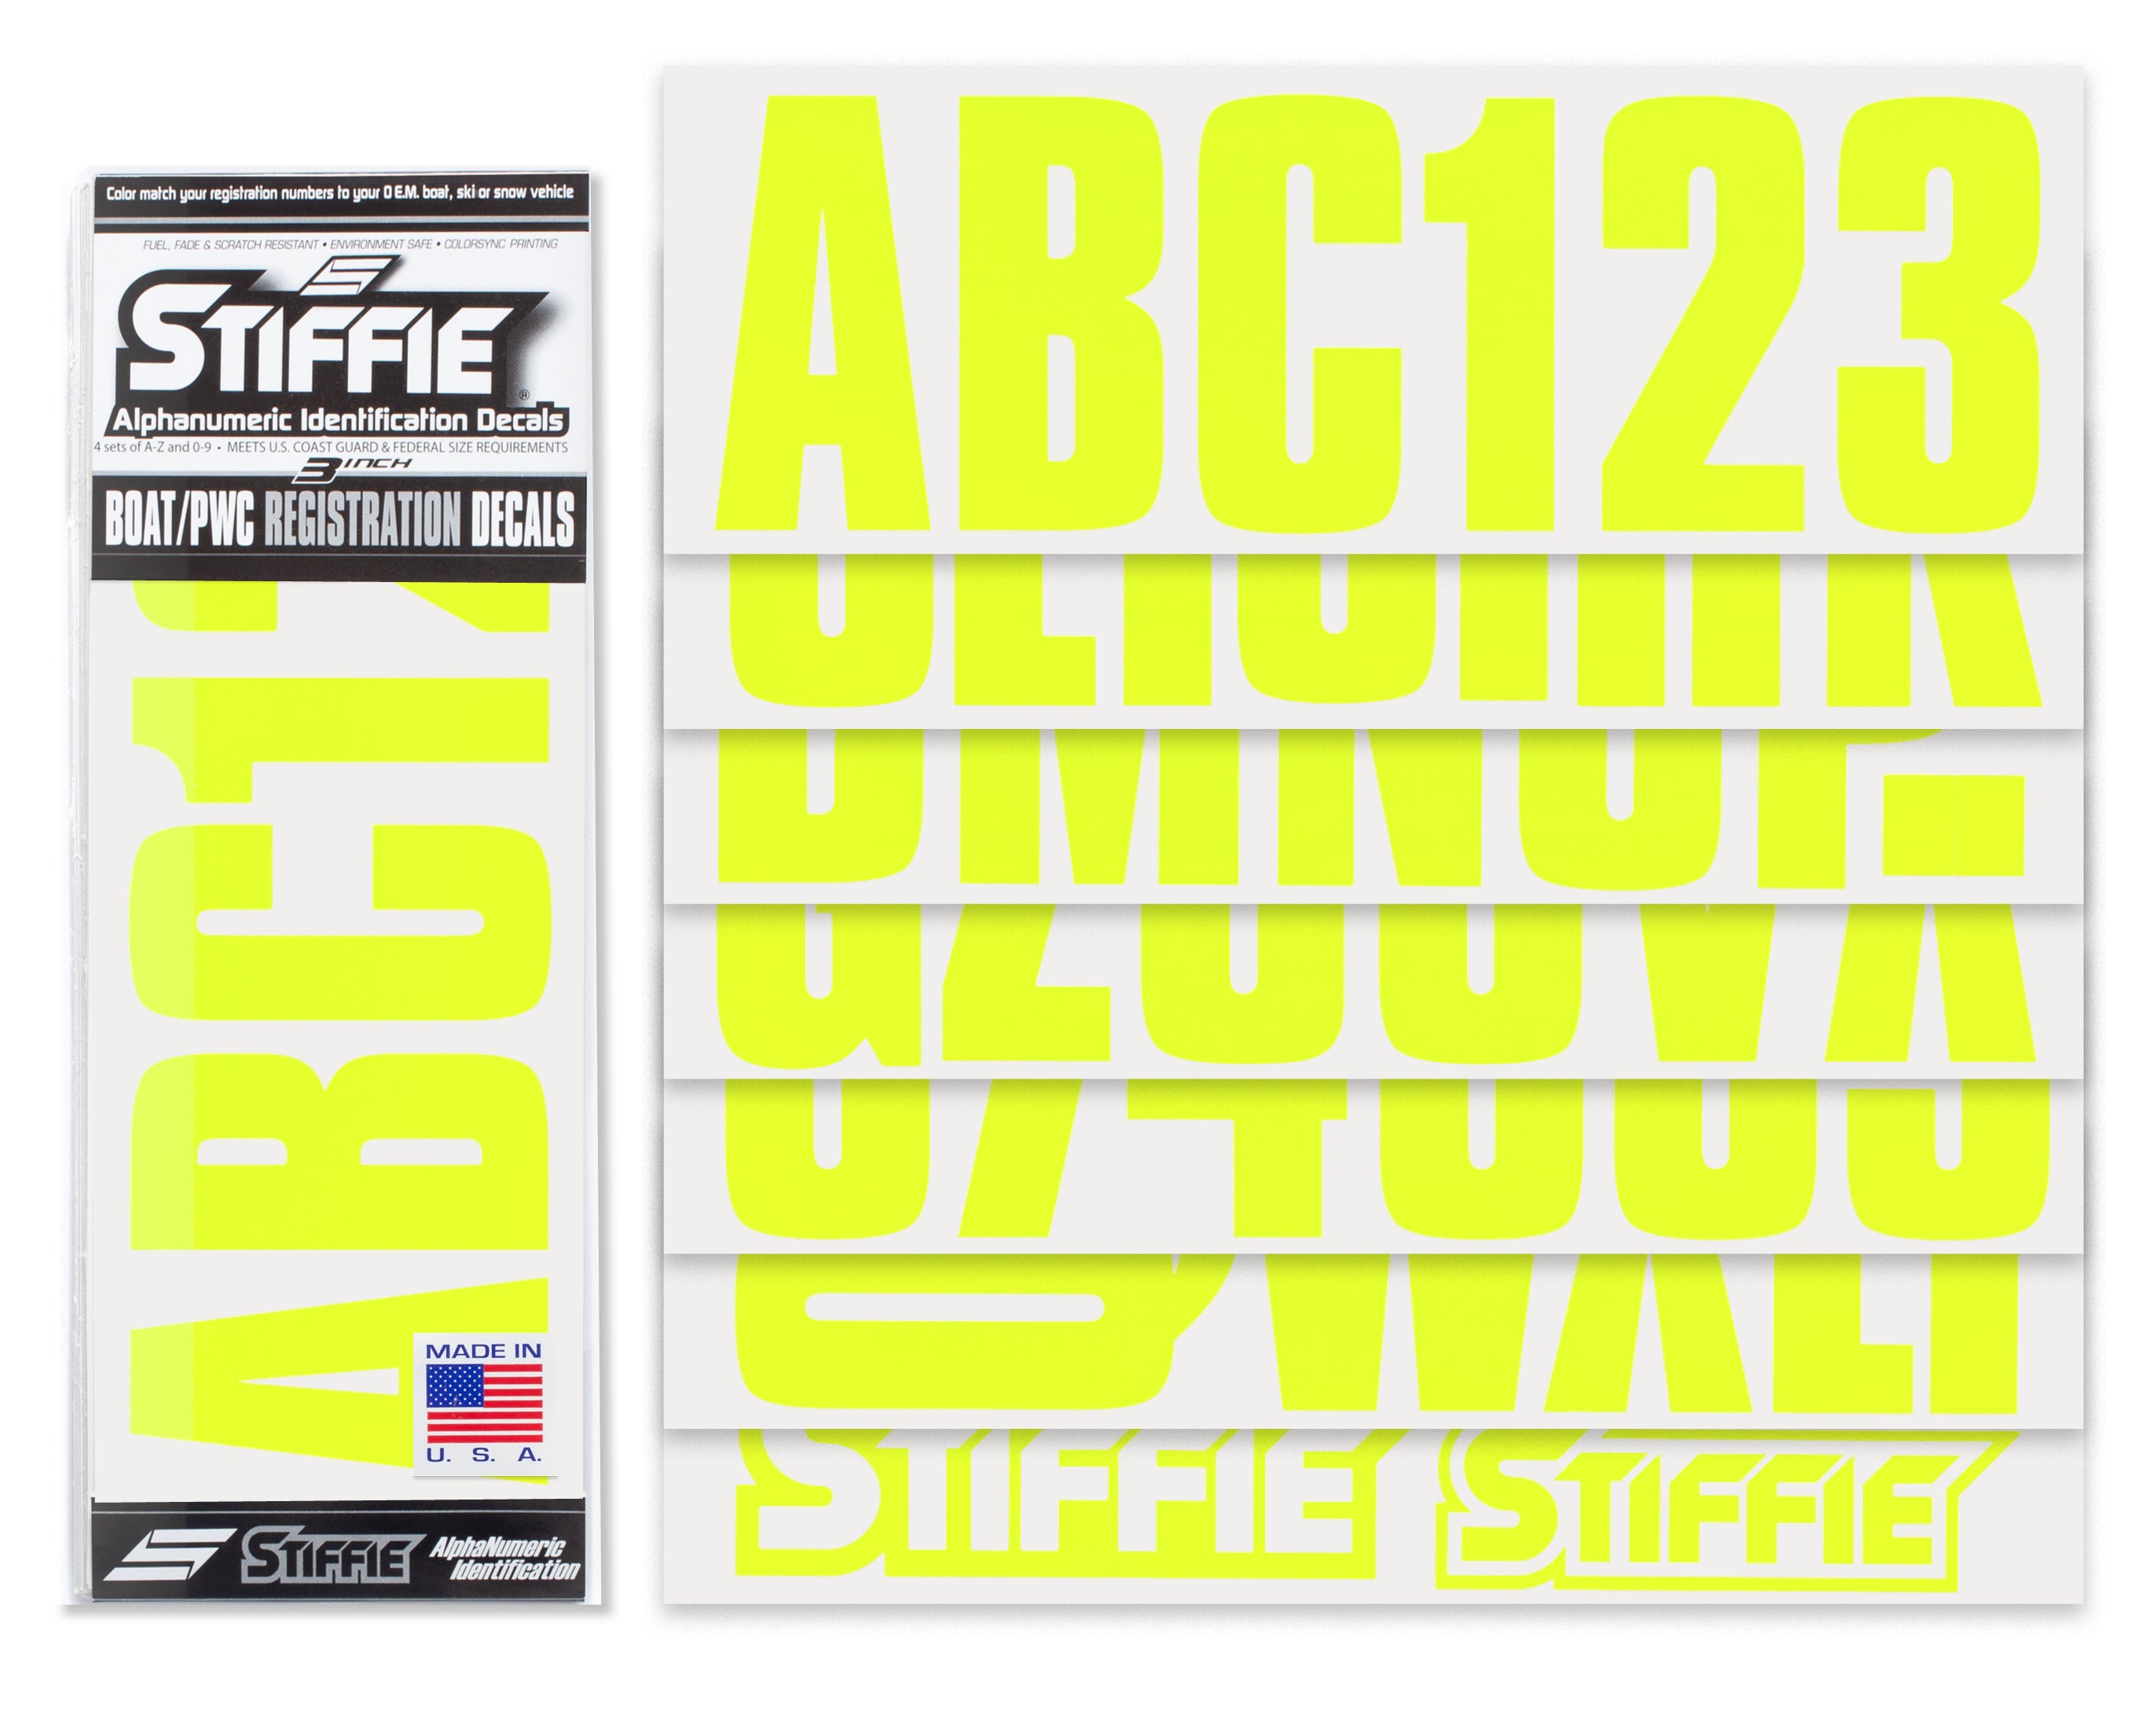 STIFFIE Uniline Day Glow Yellow 3" ID Kit Alpha-Numeric Registration Identification Numbers Stickers Decals for Boats & Personal Watercraft